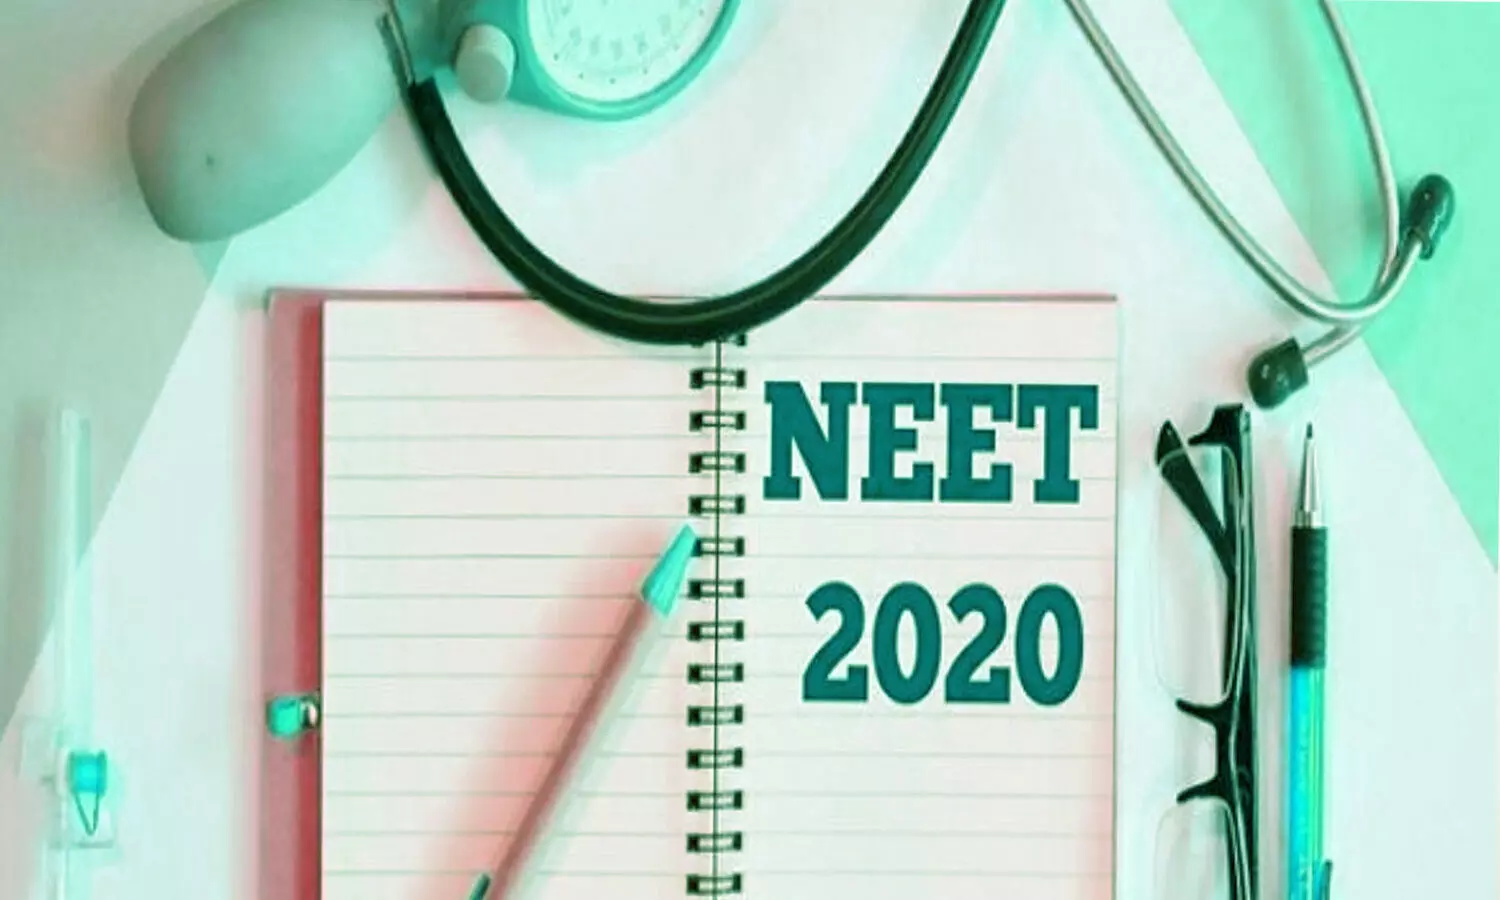 After NEET 2020 postponement, NTA opens correction facility including choice of centre cities